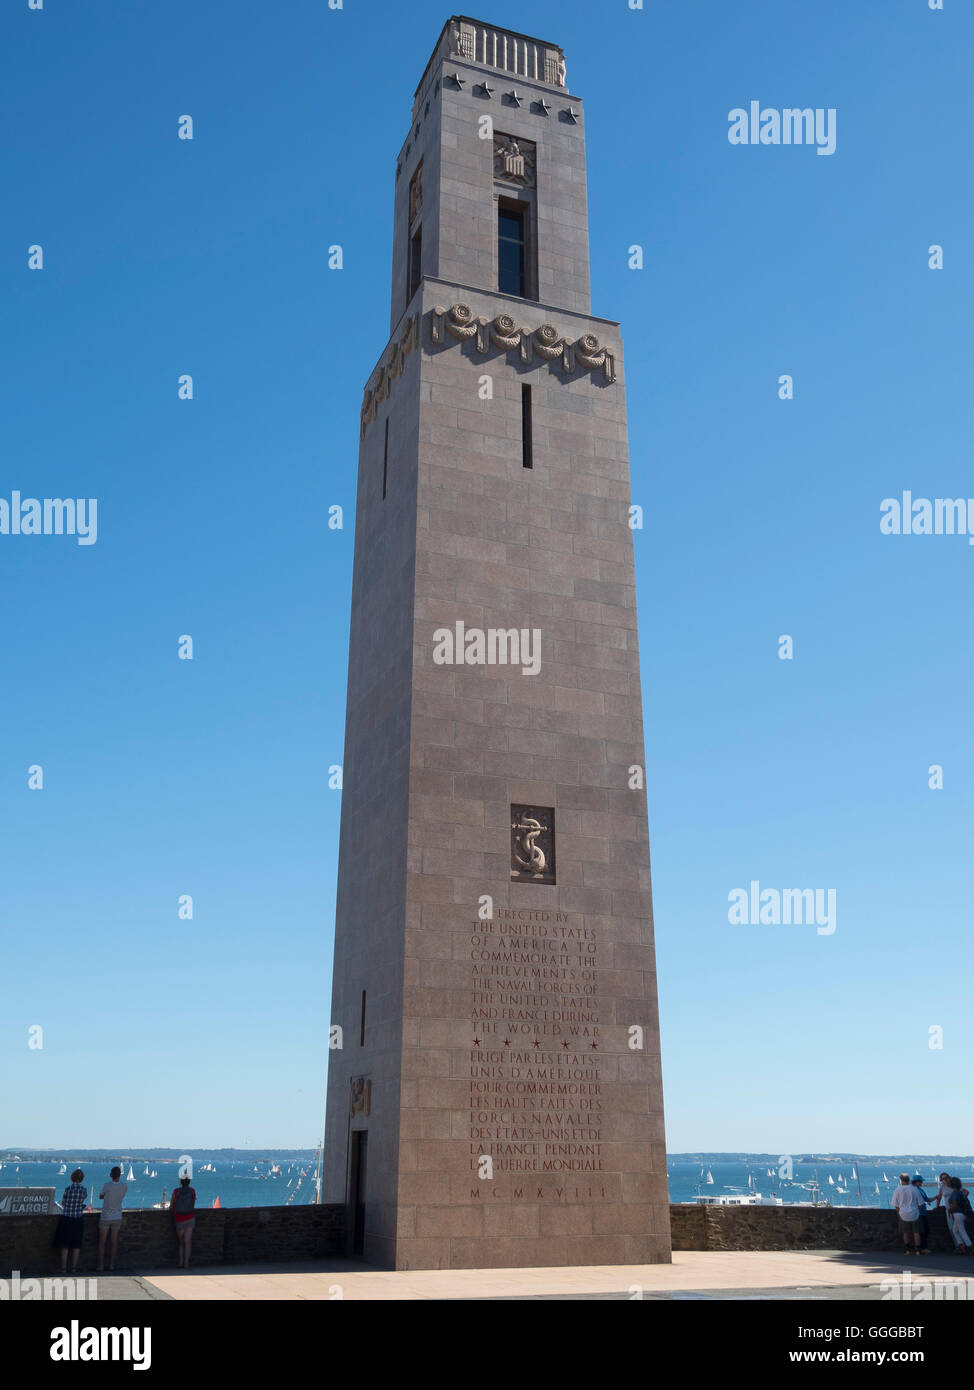 American monument, memorial raised in the cours Dajot after the Great War. (Destroyed in 1941 and reconstructed in 1958). France Stock Photo